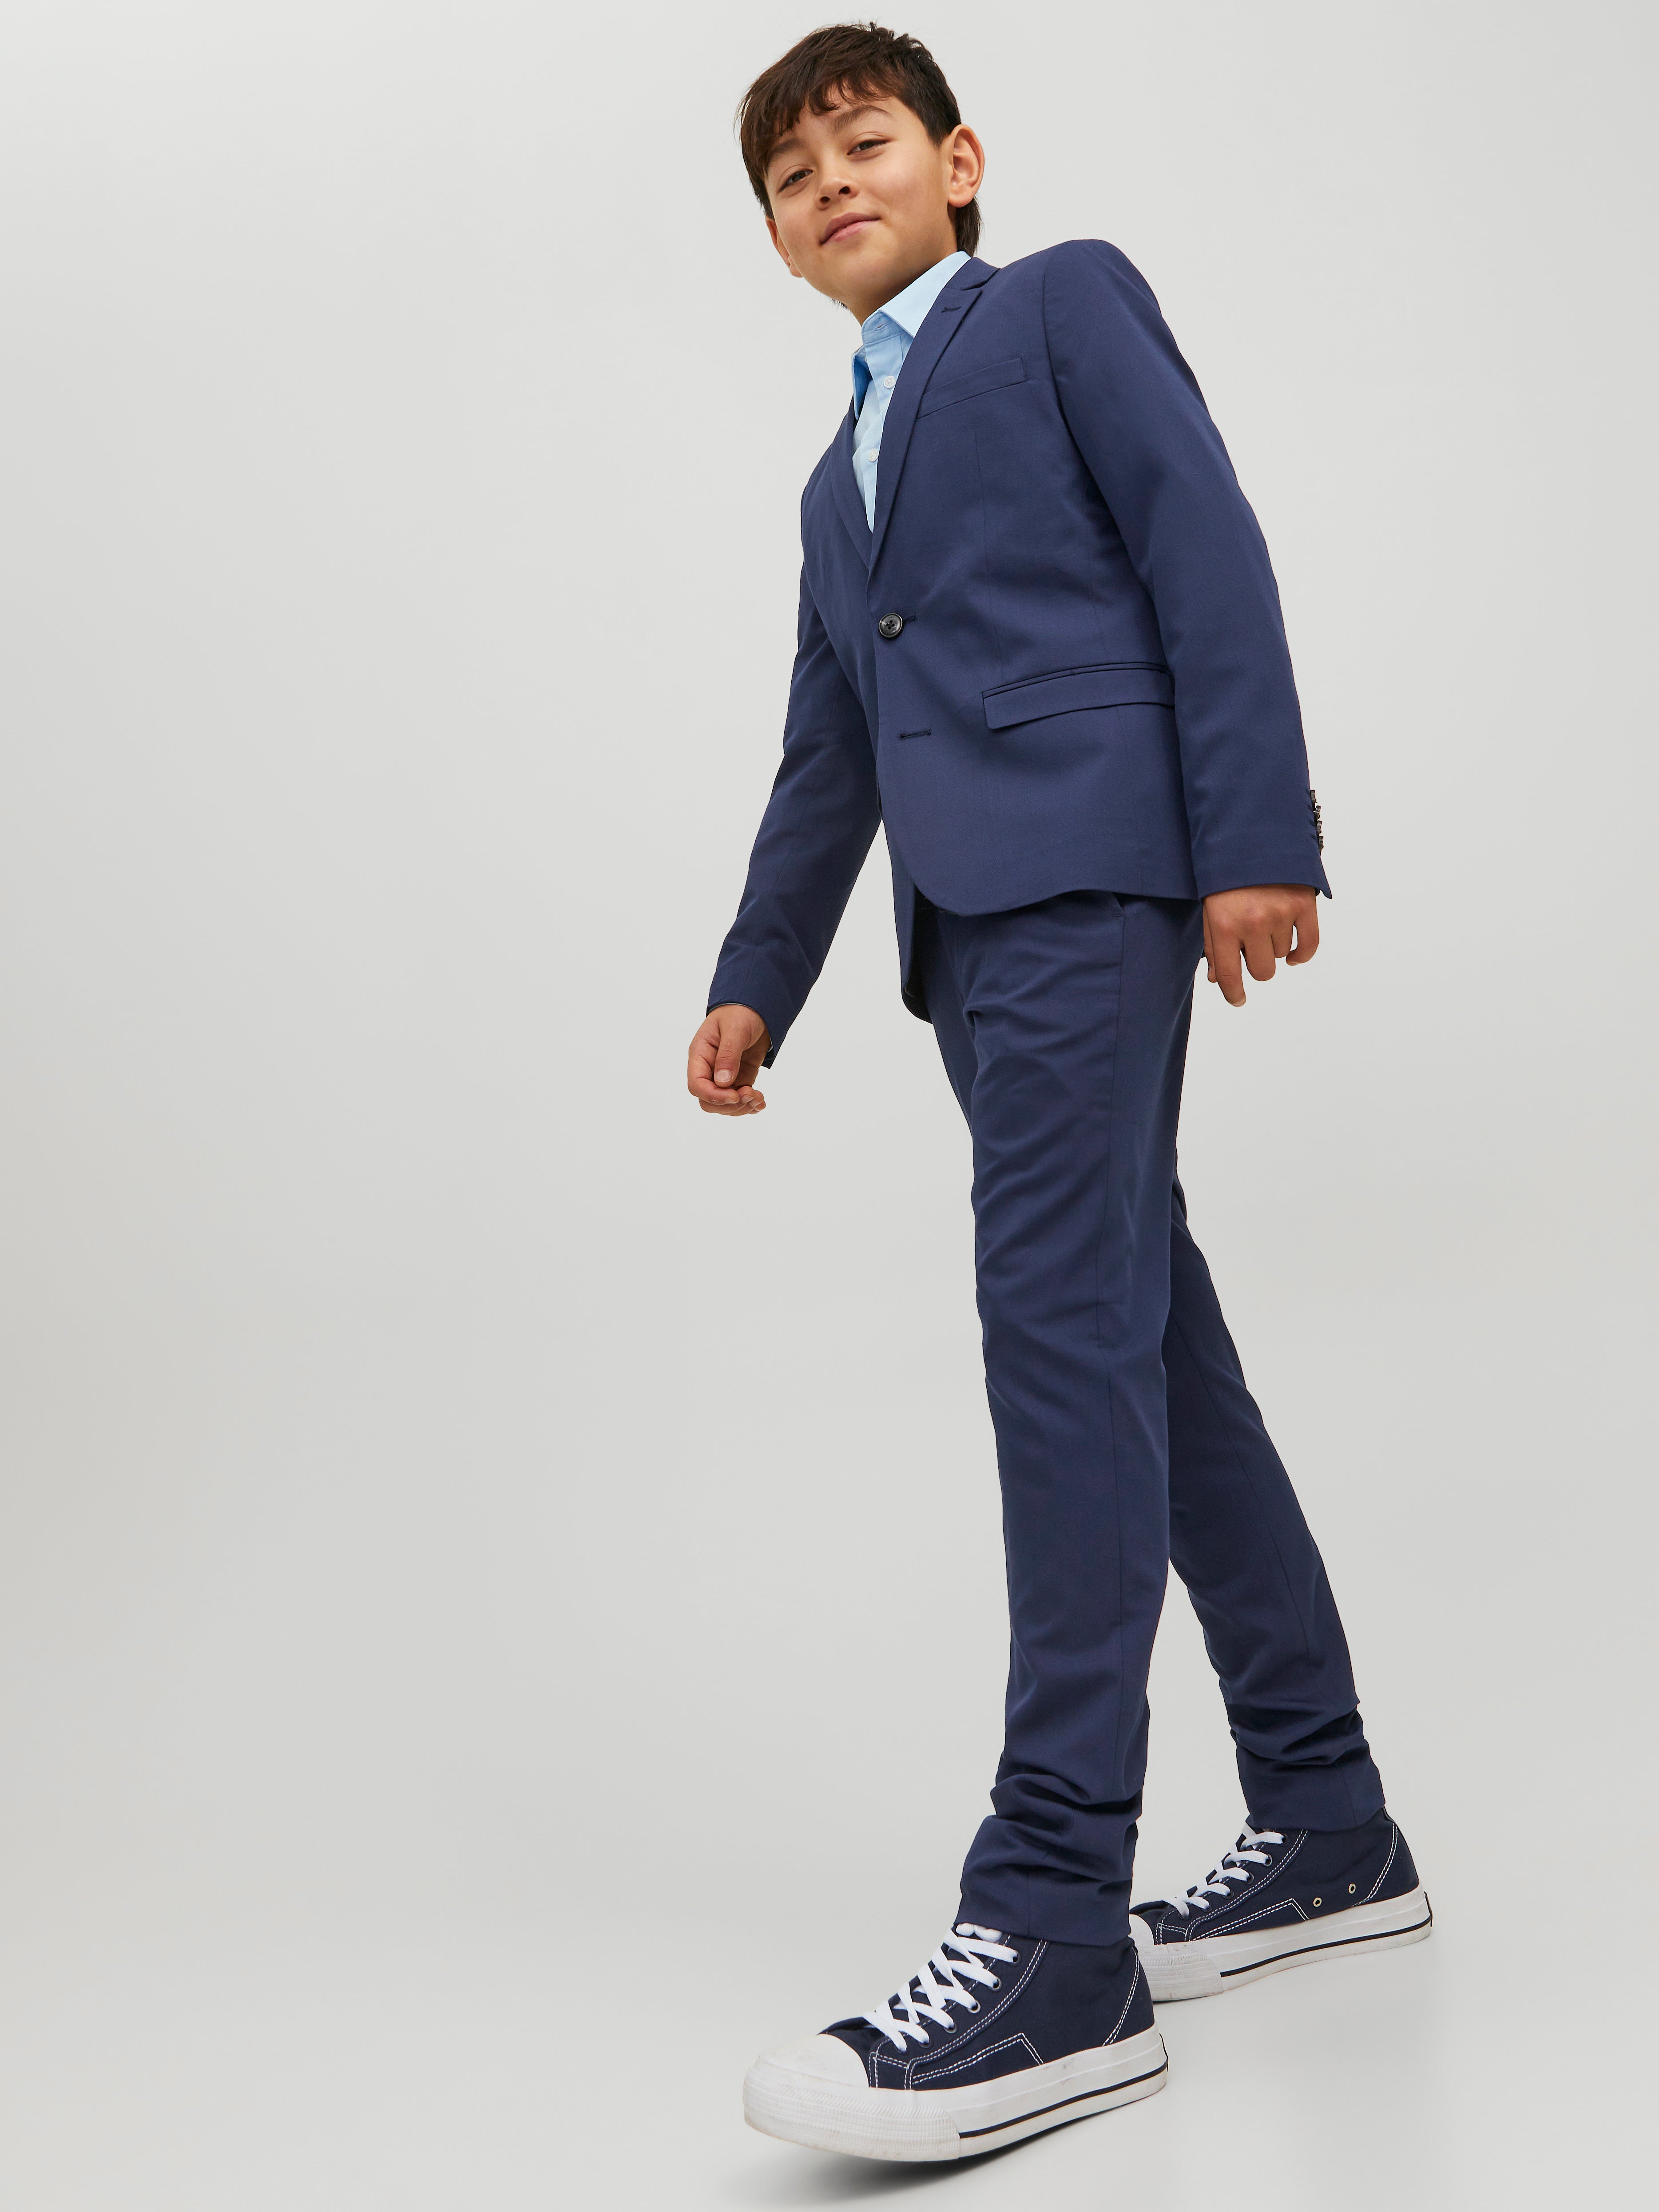 Boys Suits  Buy Suits for Boys Online in India  Myntra